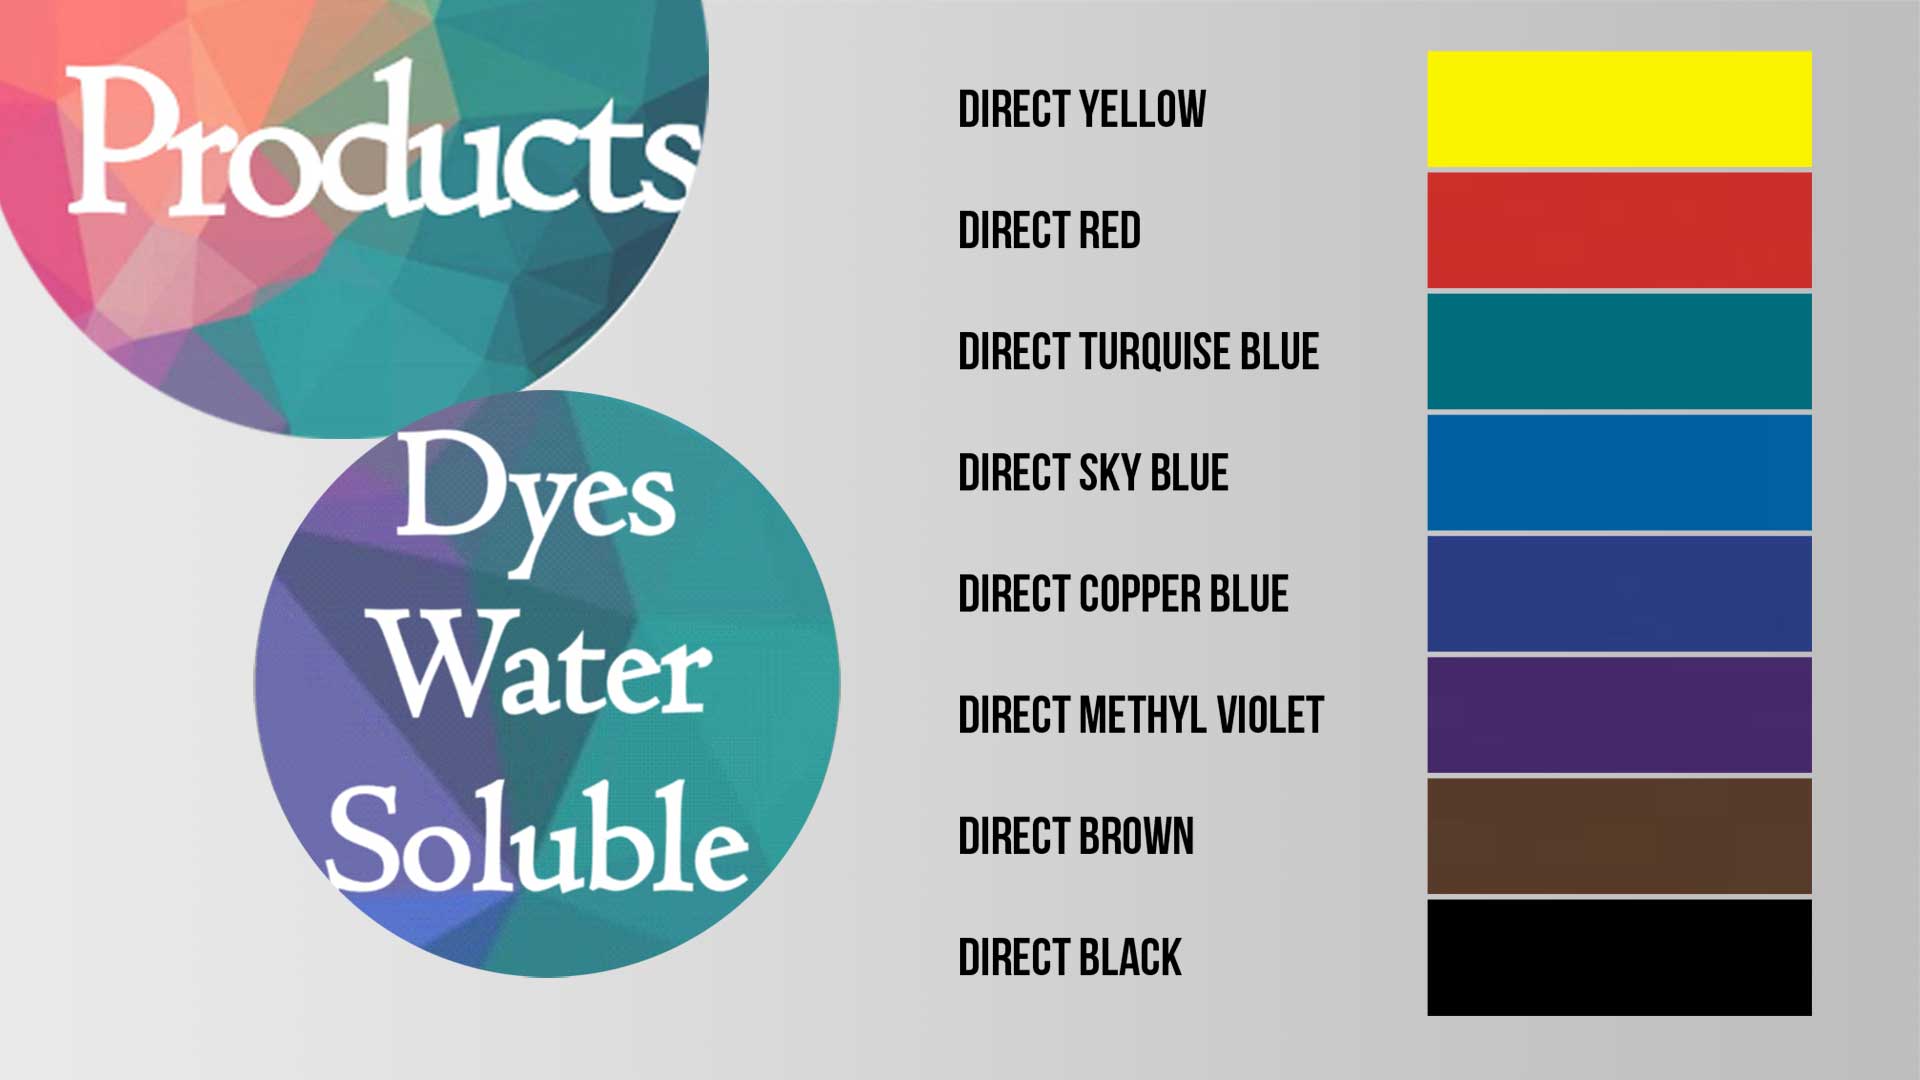 Dyes-Water-Soluble